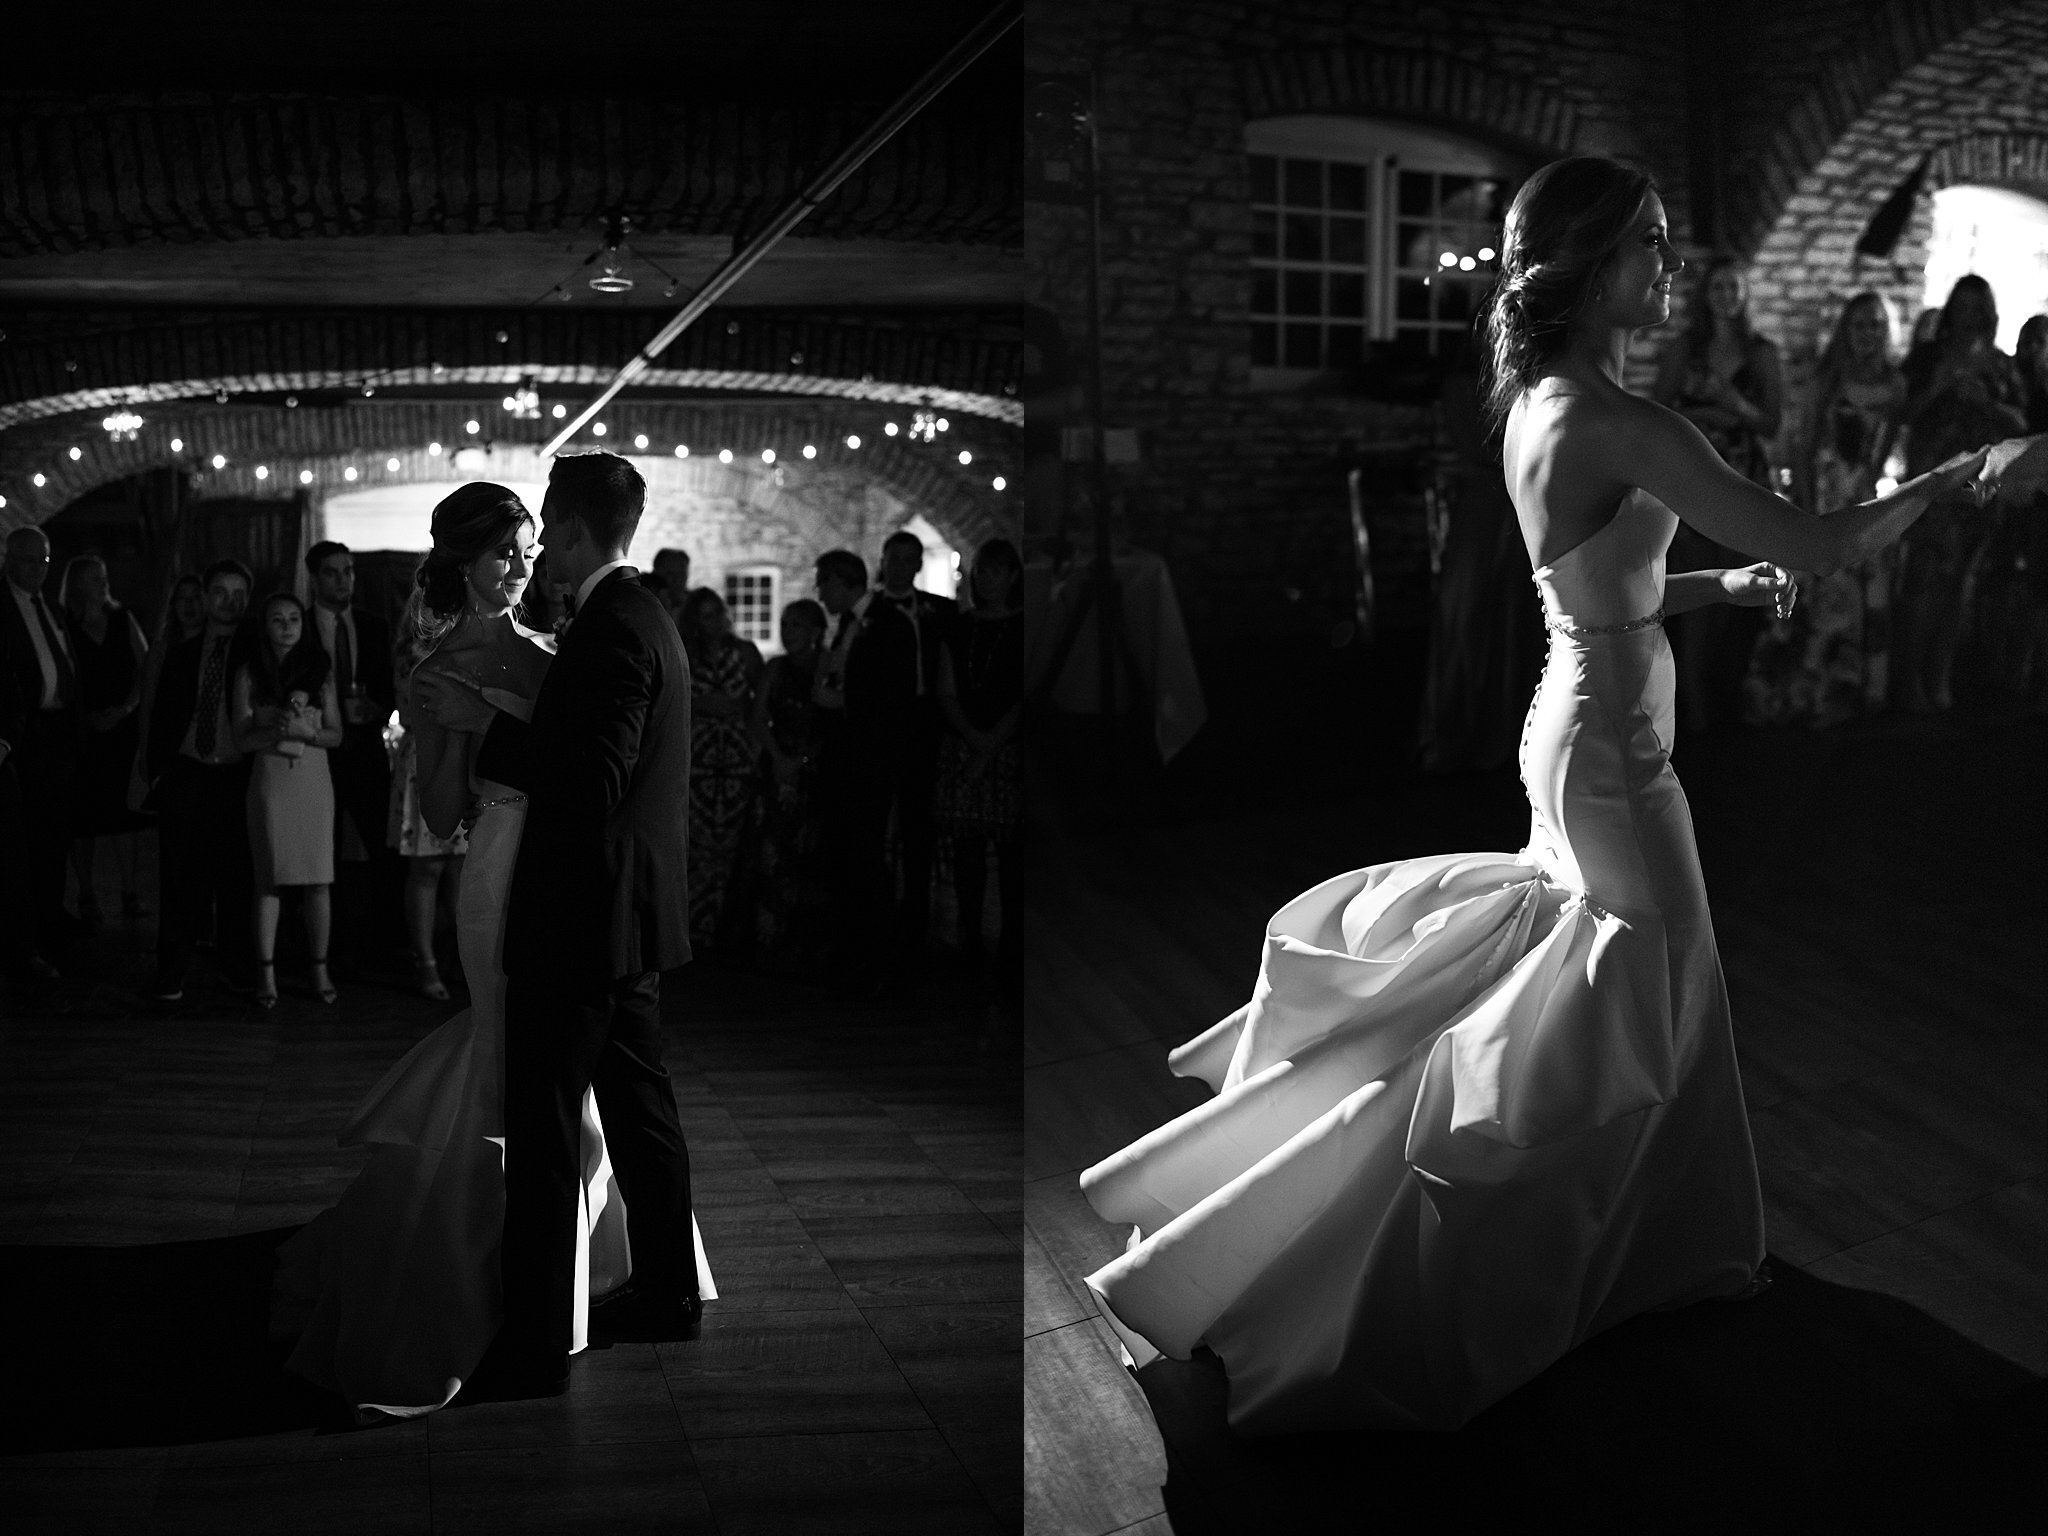  Bride and groom first dance at Mayowood Stone Barn 2 of 2. 